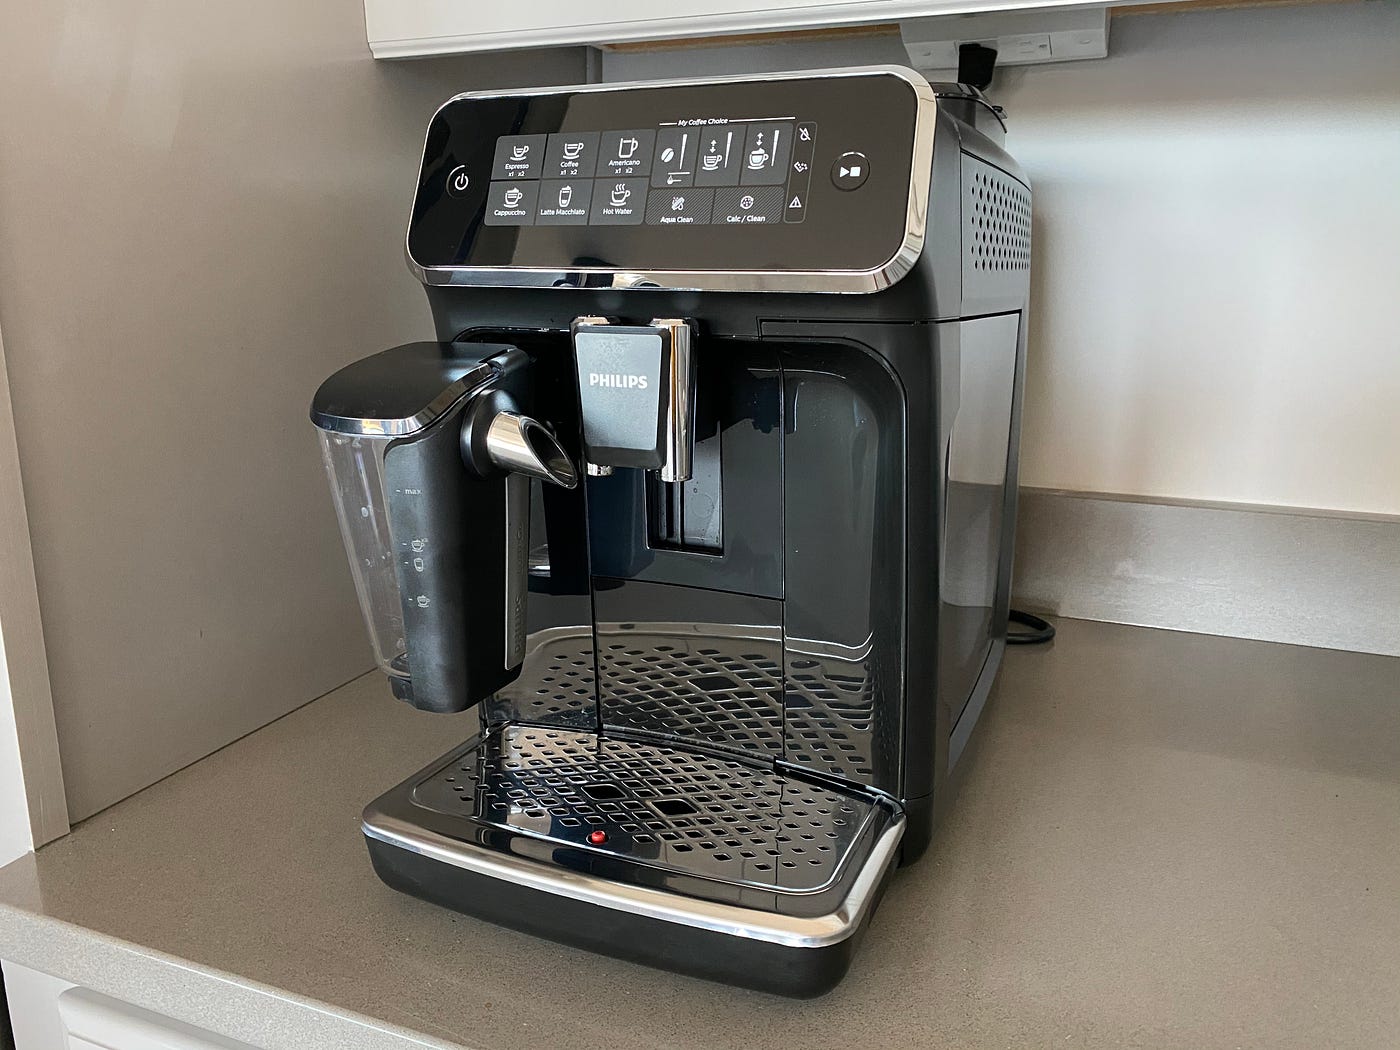 The Best Coffee Maker Ever? Our Review of the Philips 3200 Series